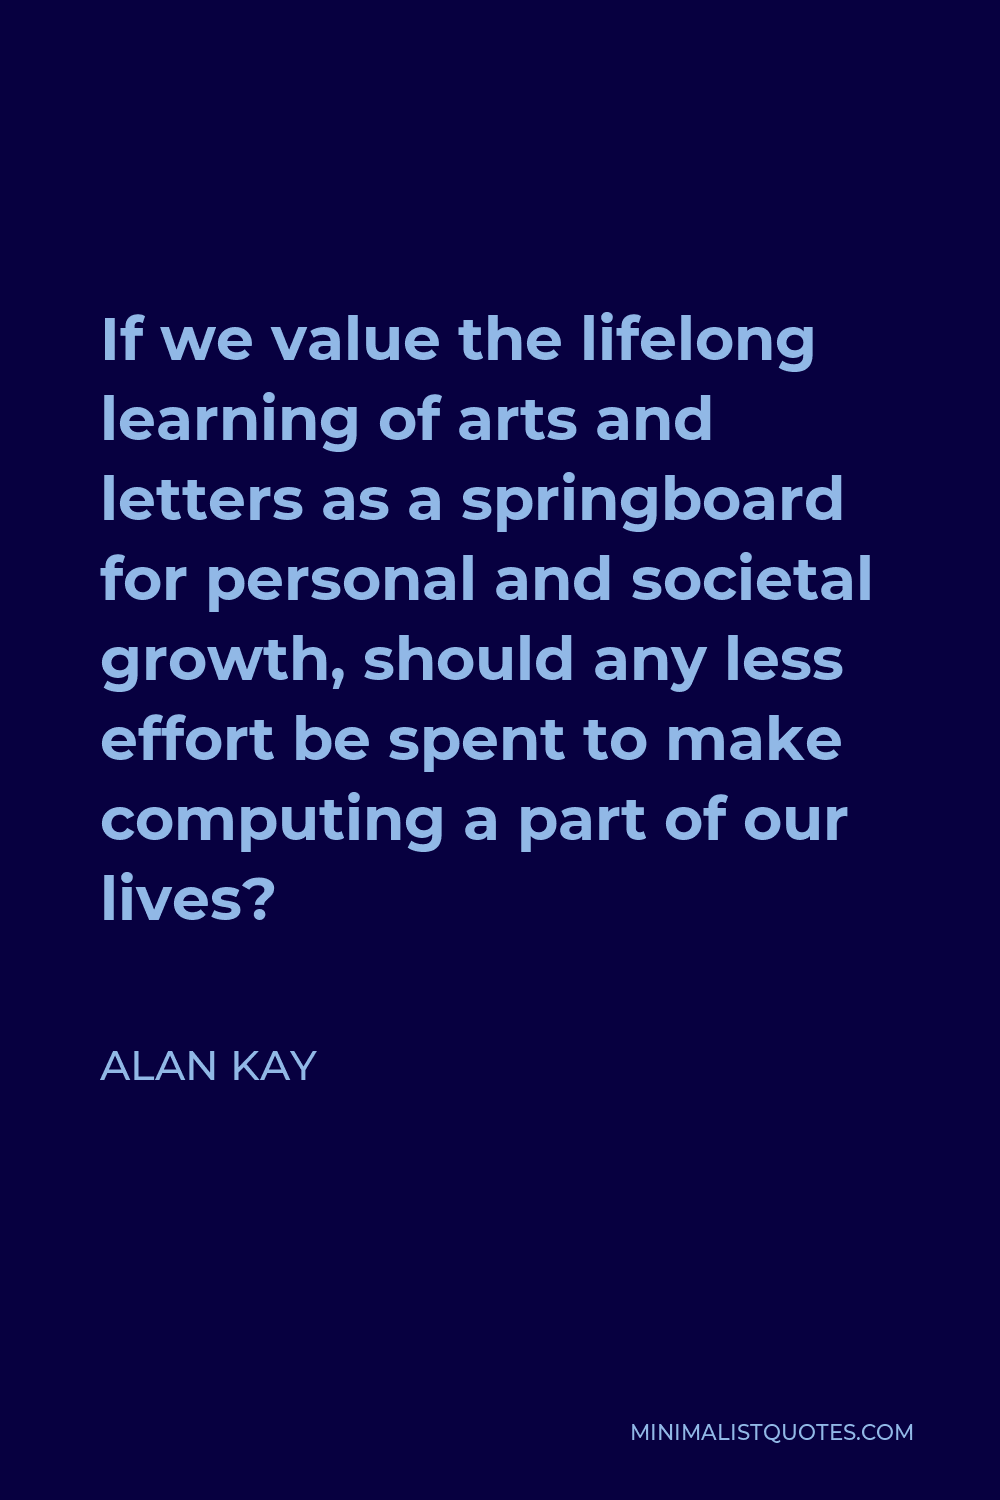 Alan Kay Quote - If we value the lifelong learning of arts and letters as a springboard for personal and societal growth, should any less effort be spent to make computing a part of our lives?